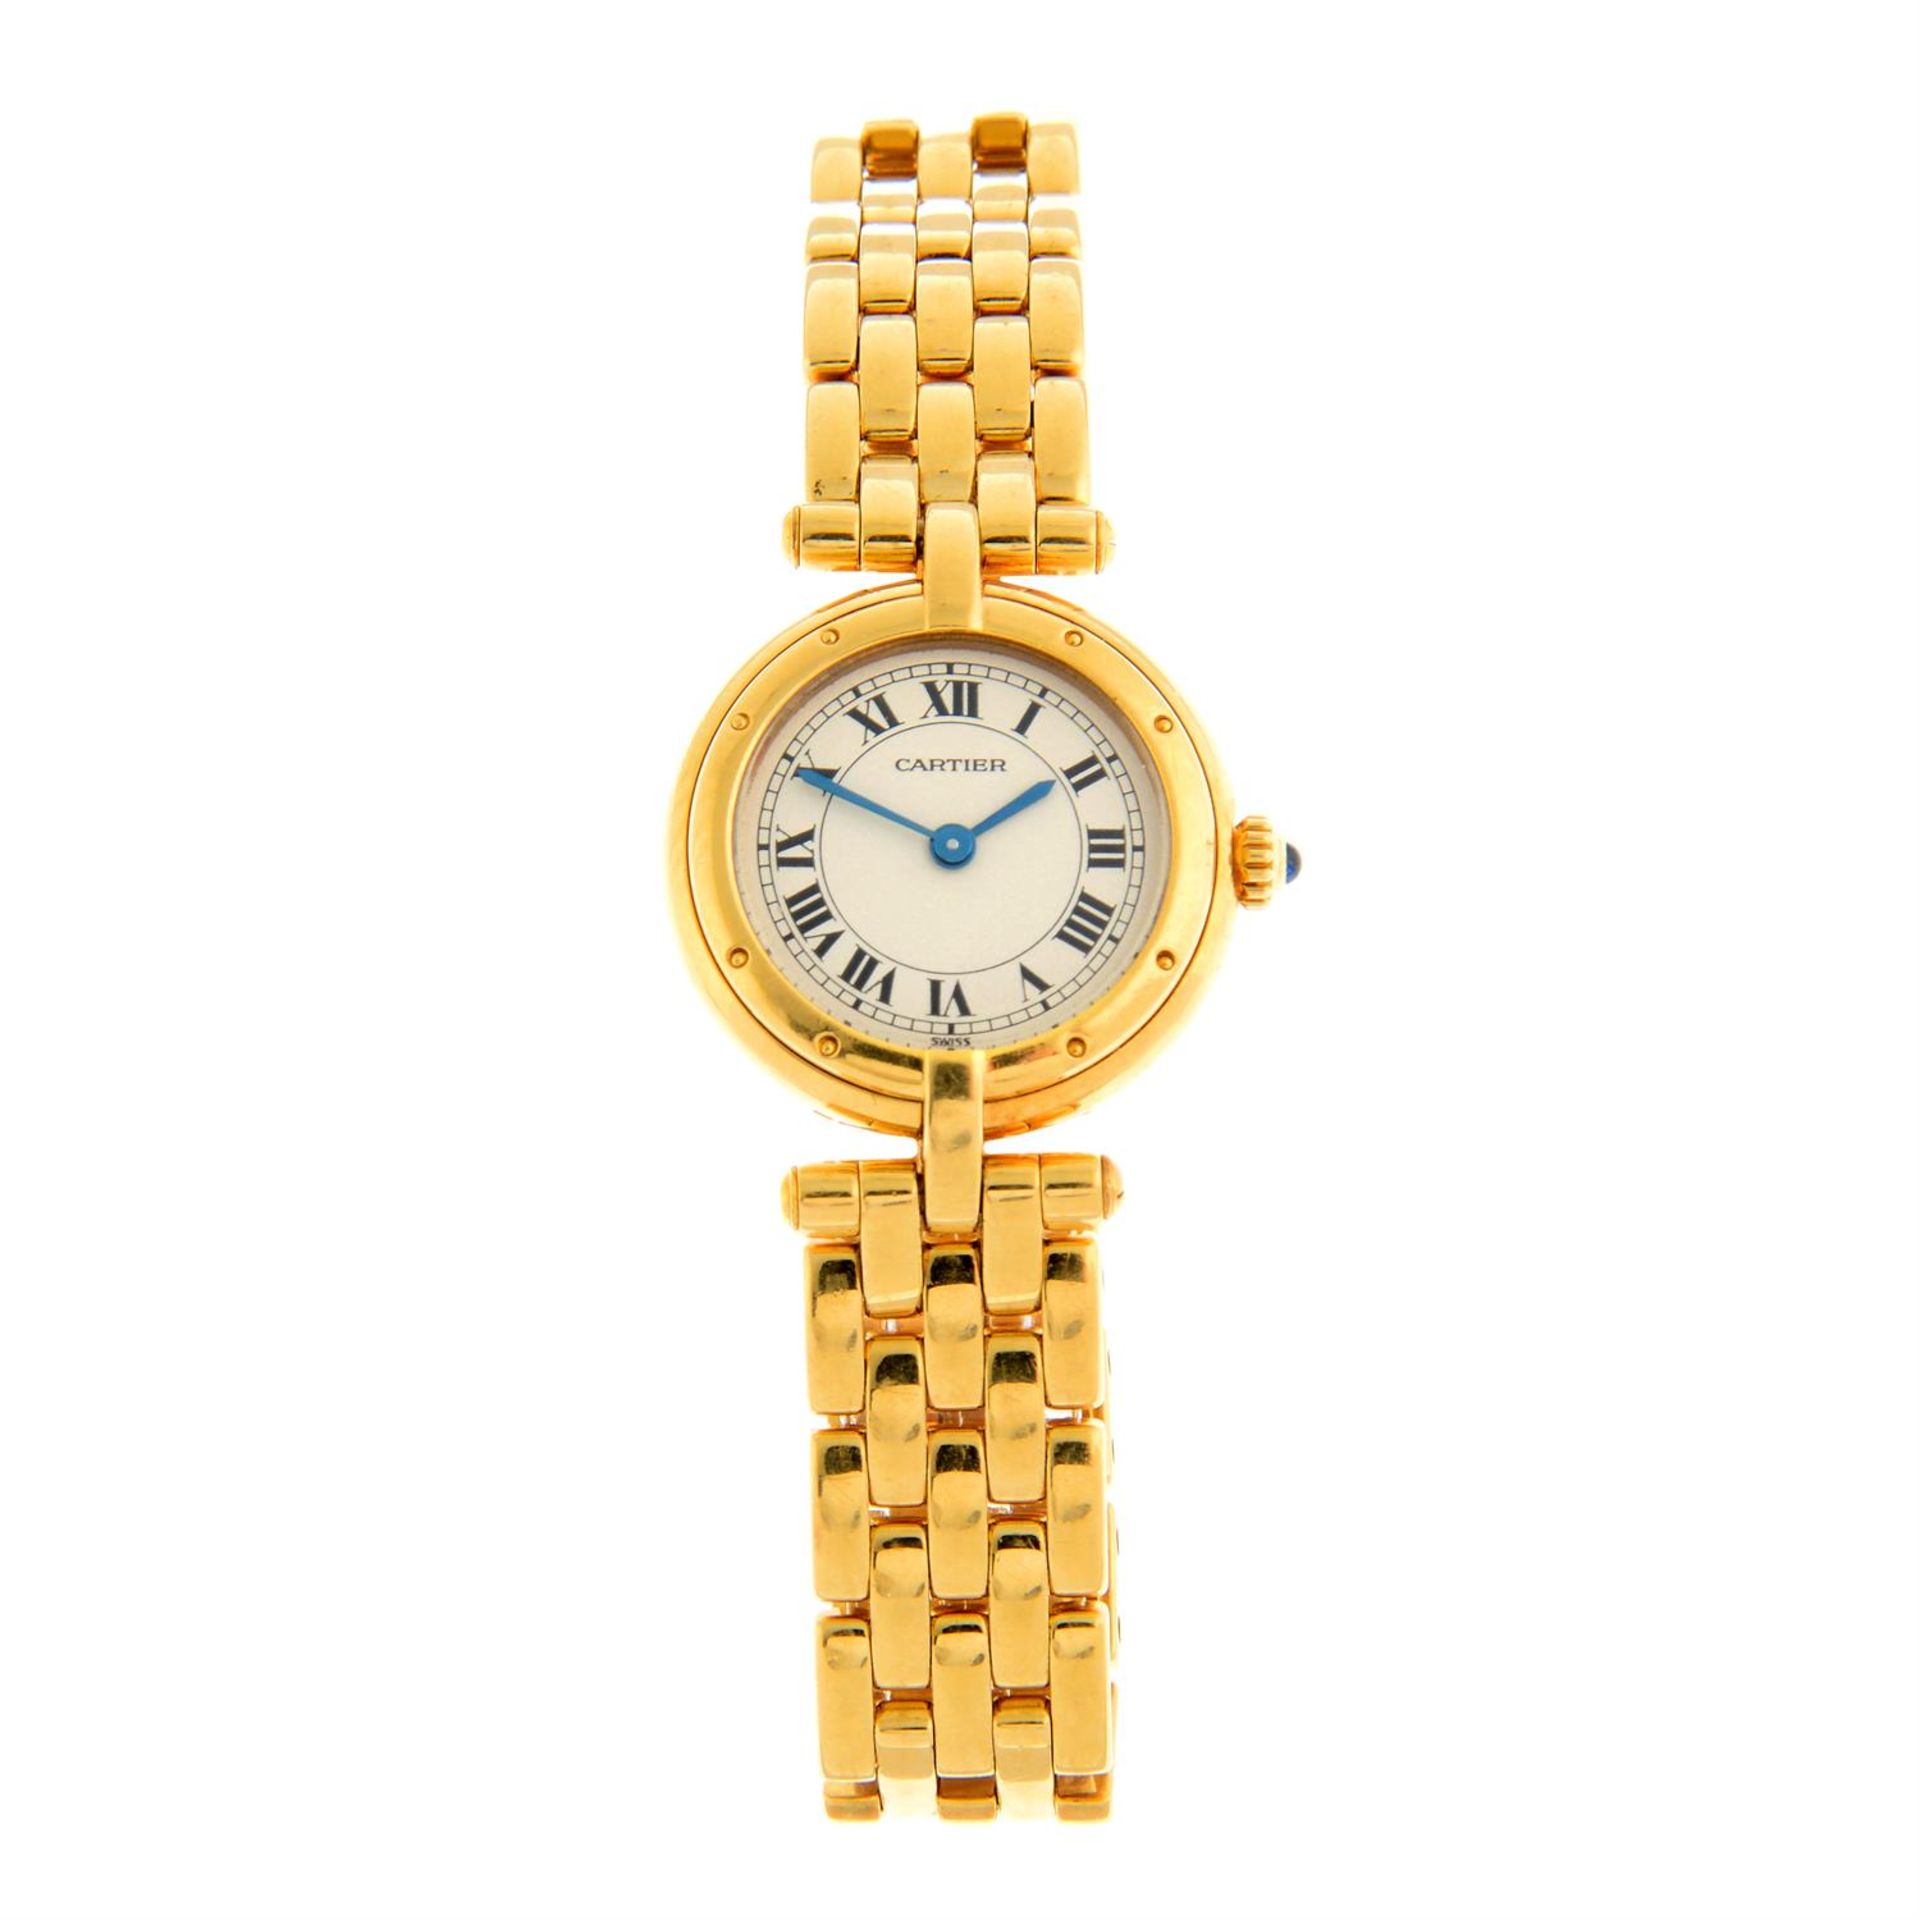 CARTIER - an 18ct yellow gold Panthere Vendome bracelet watch, 24mm.